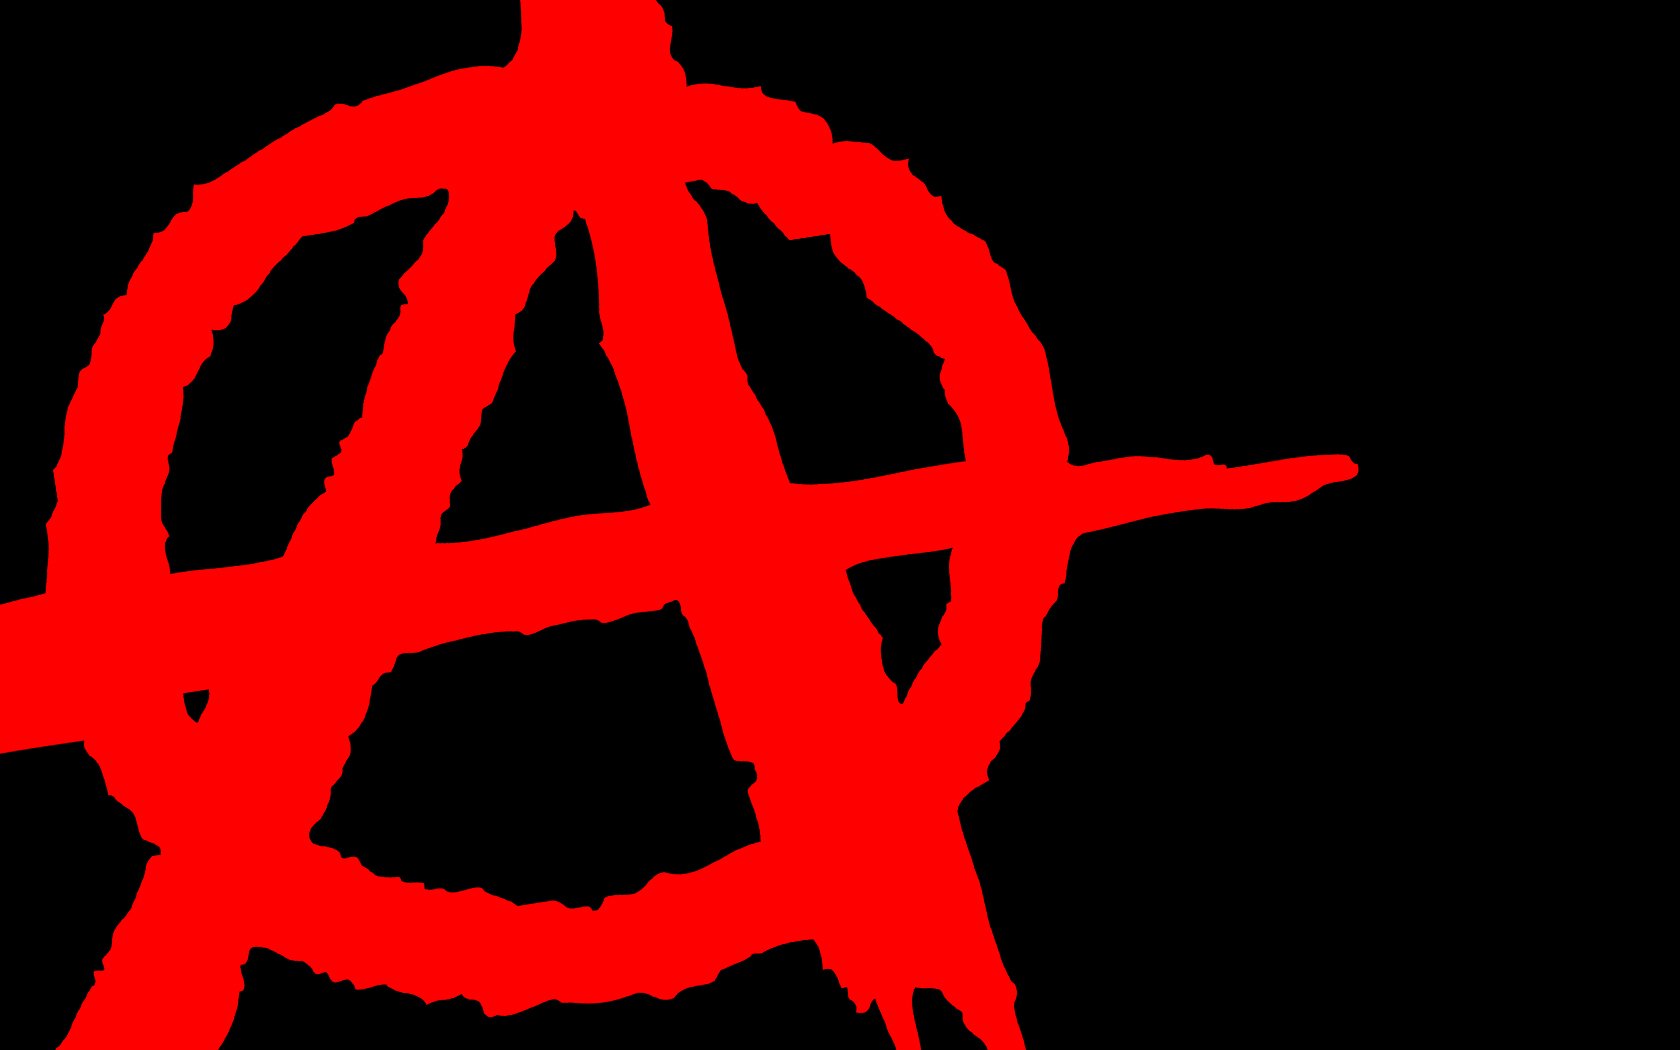 Anarchy Computer Wallpapers Desktop Backgrounds 1680x1050 ID